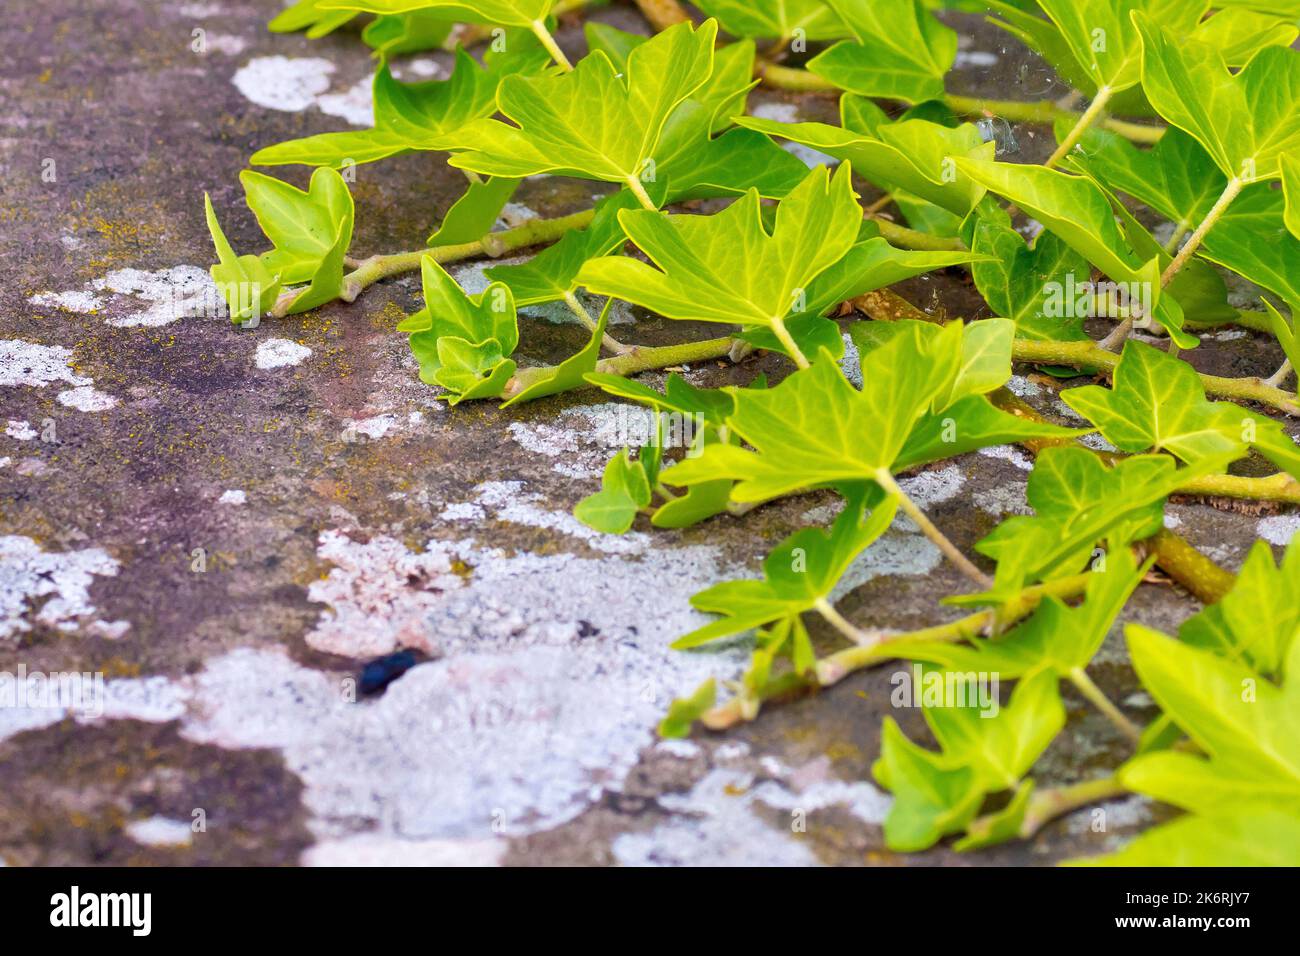 Ivy (hedera helix), close up showing tendrils of the climbing plant spreading out over a sandstone wall. Stock Photo